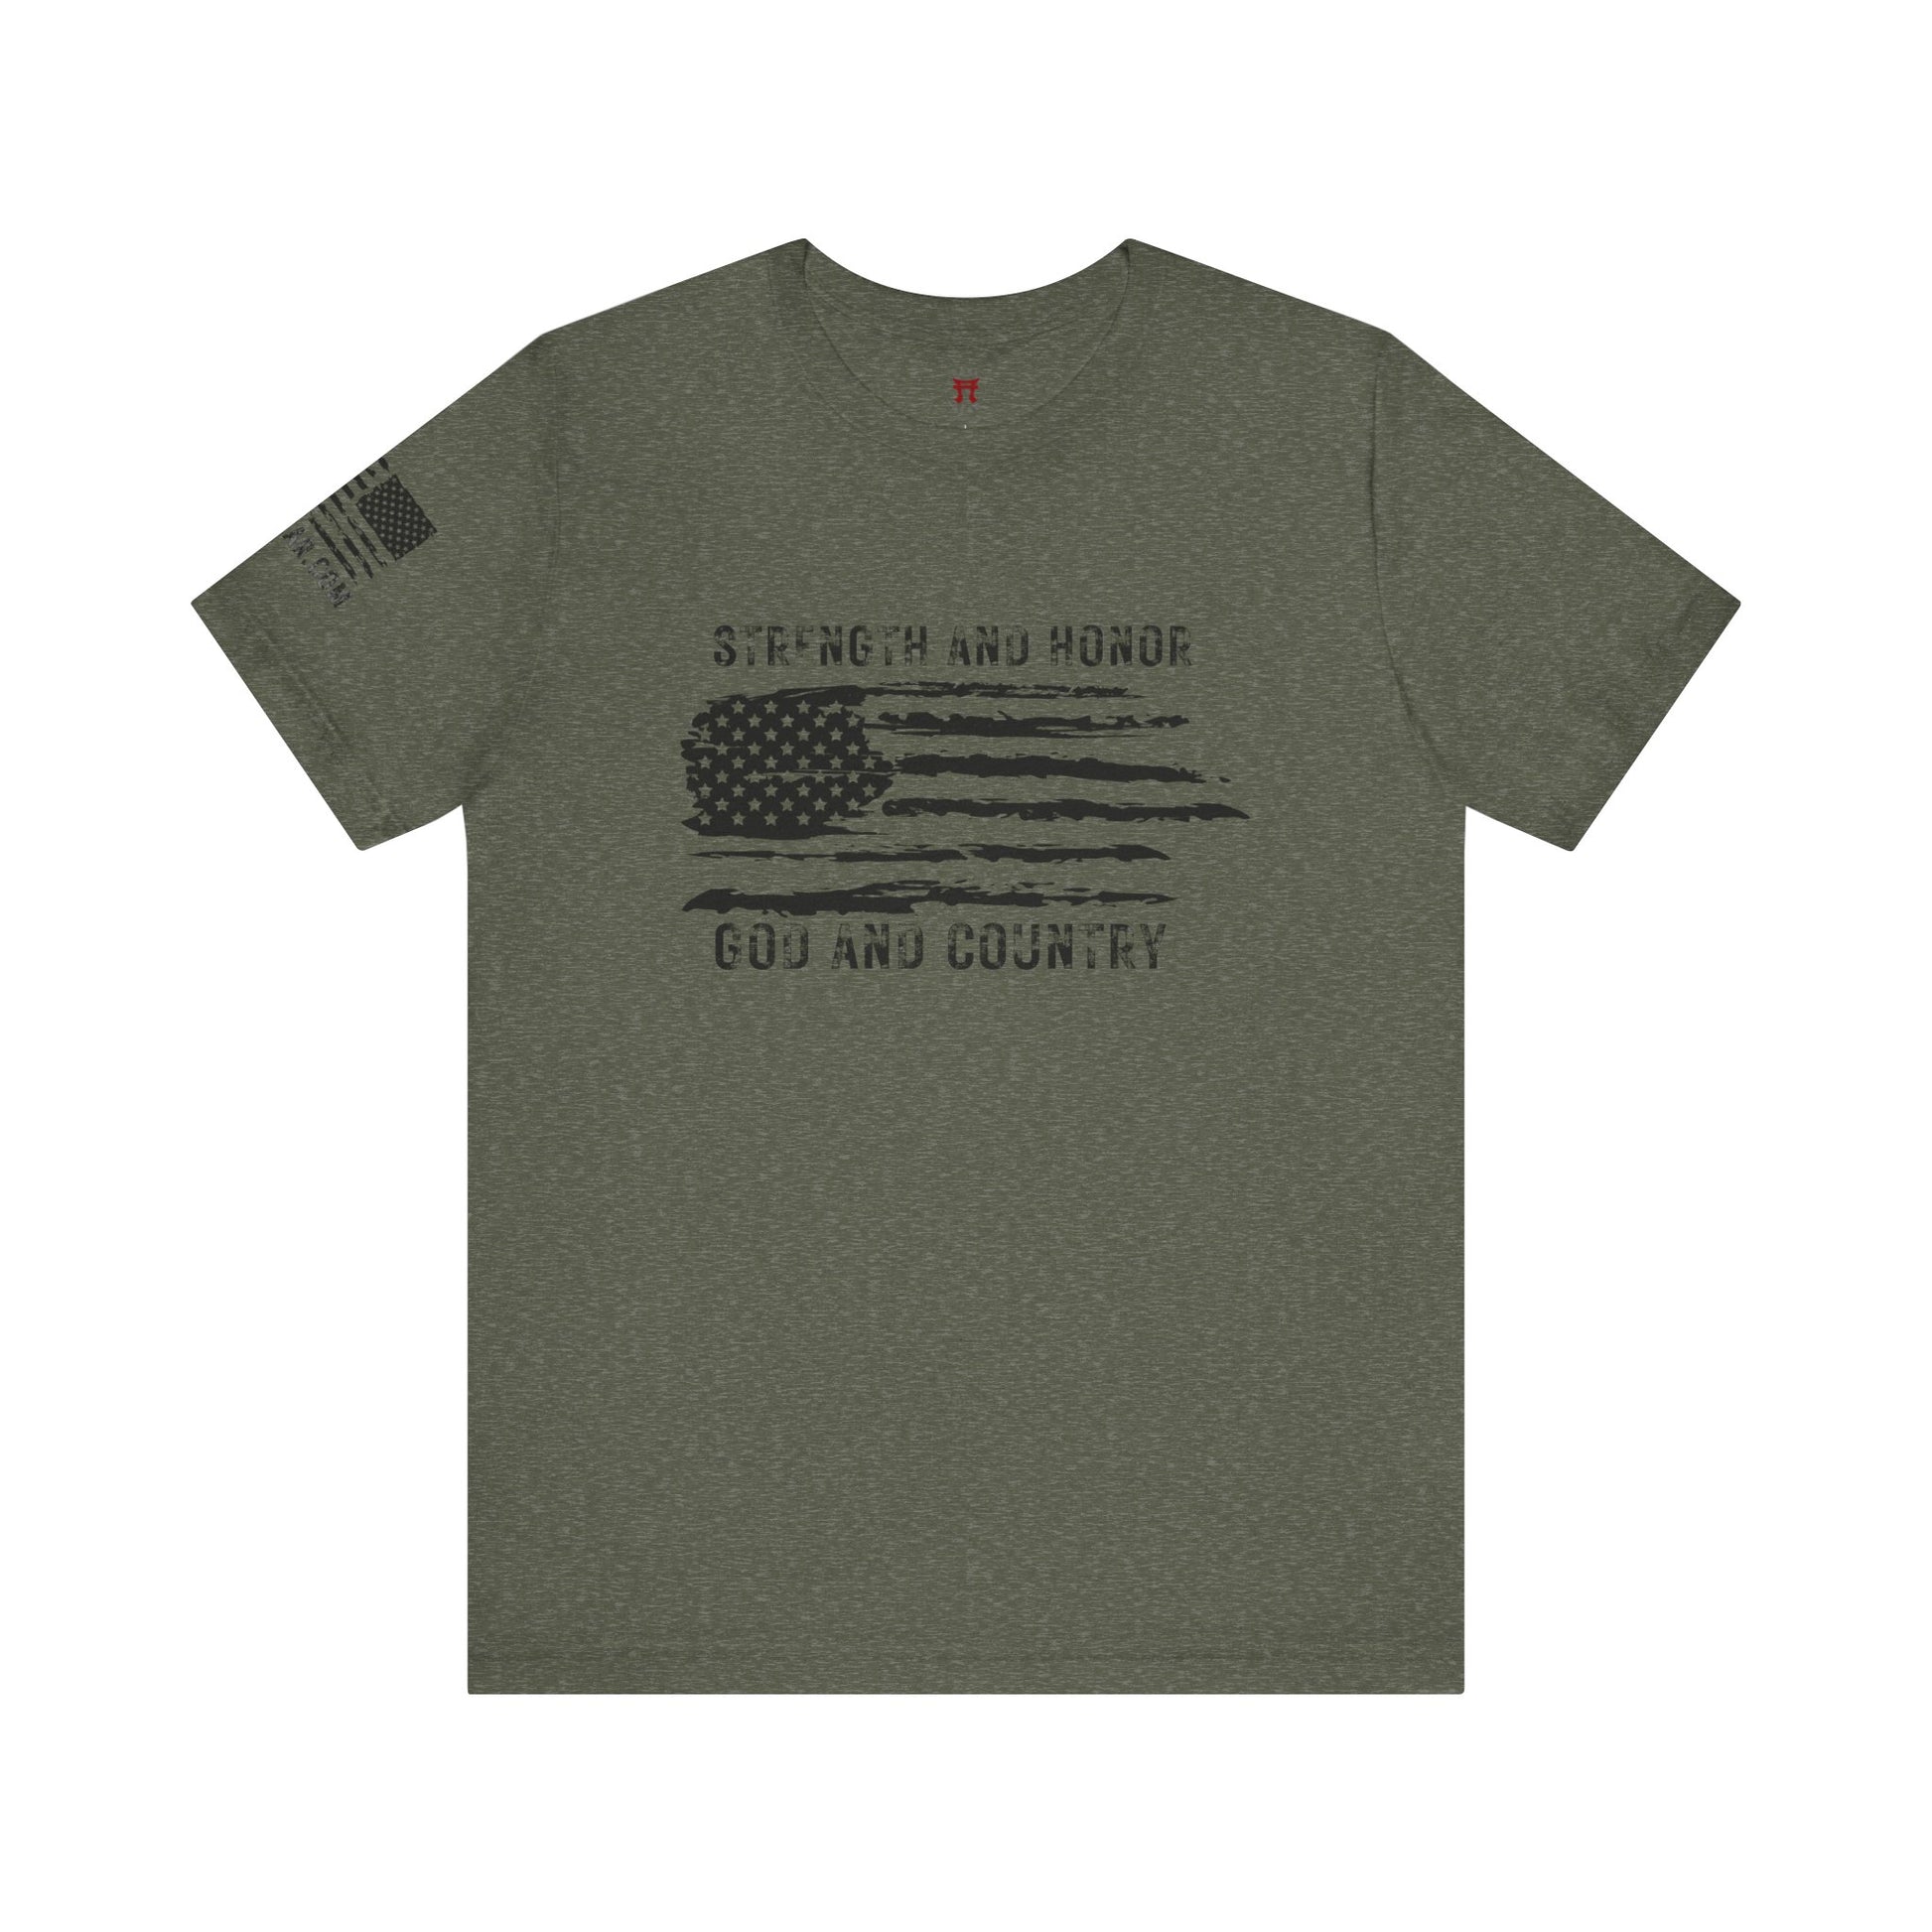 Rakkgear GOD and Country Short Sleeve Tee in military green